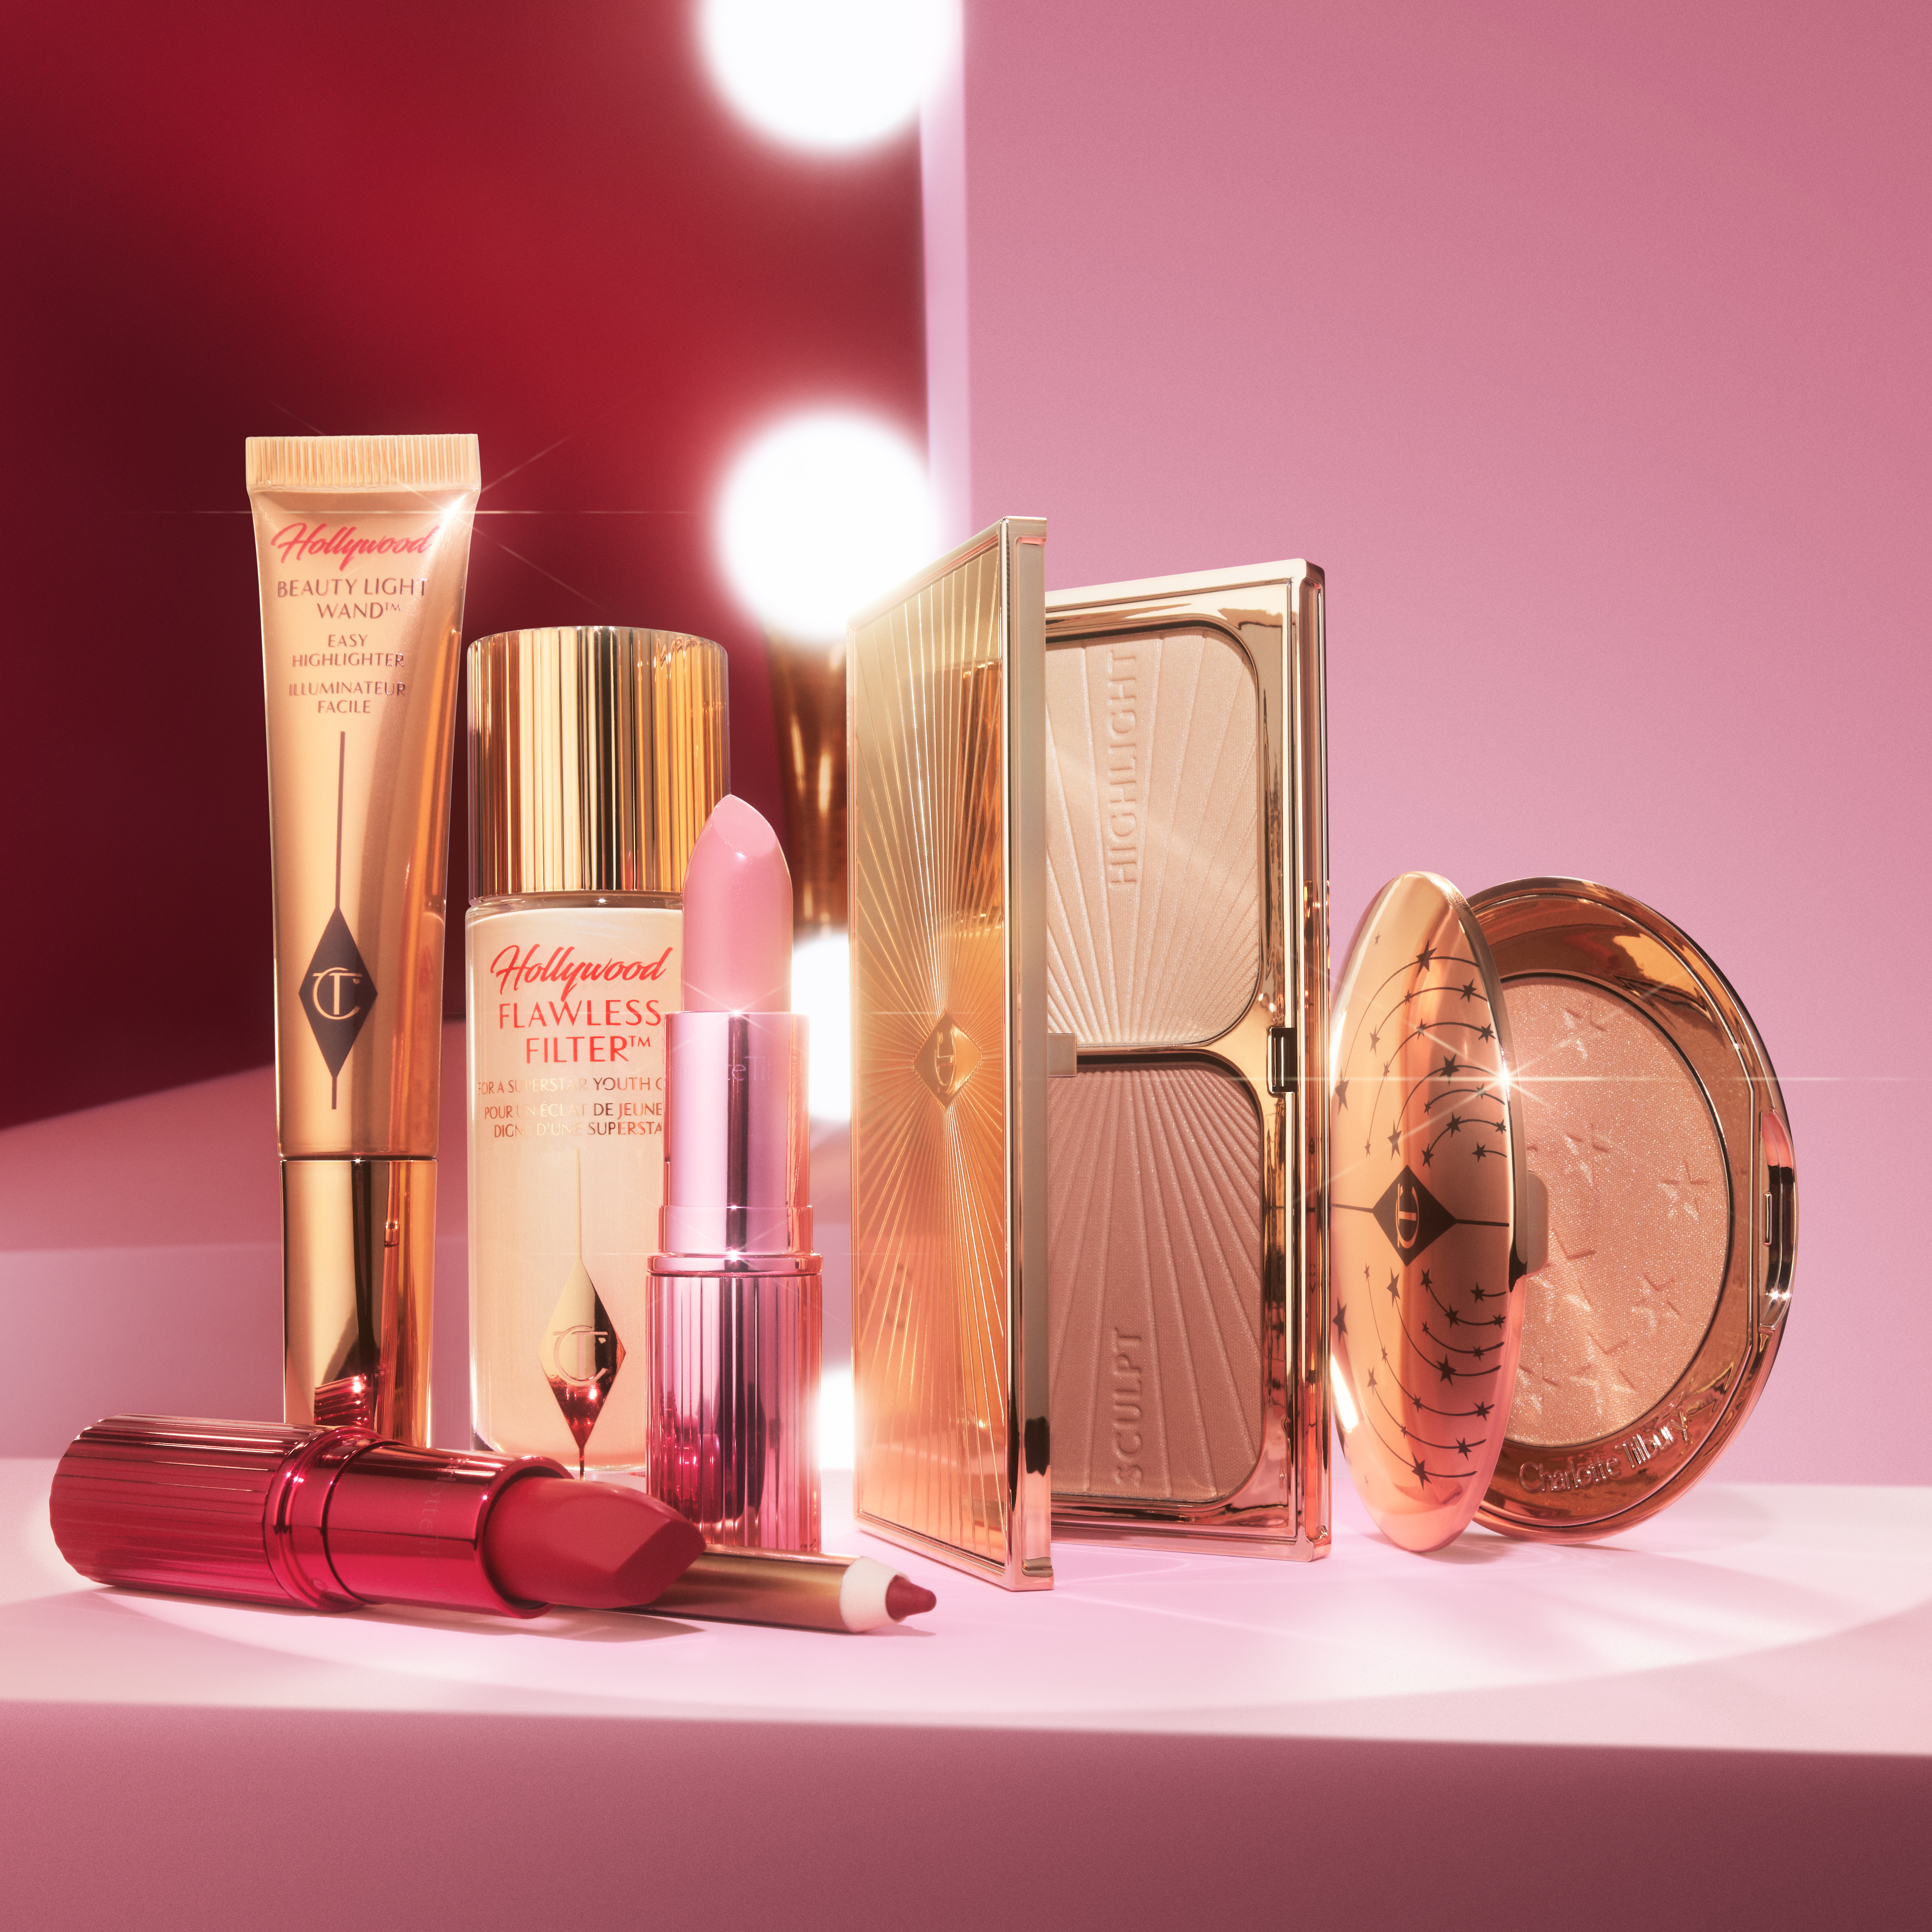 Charlotte Tilbury makeup products that are perfect Mother's Day gifts